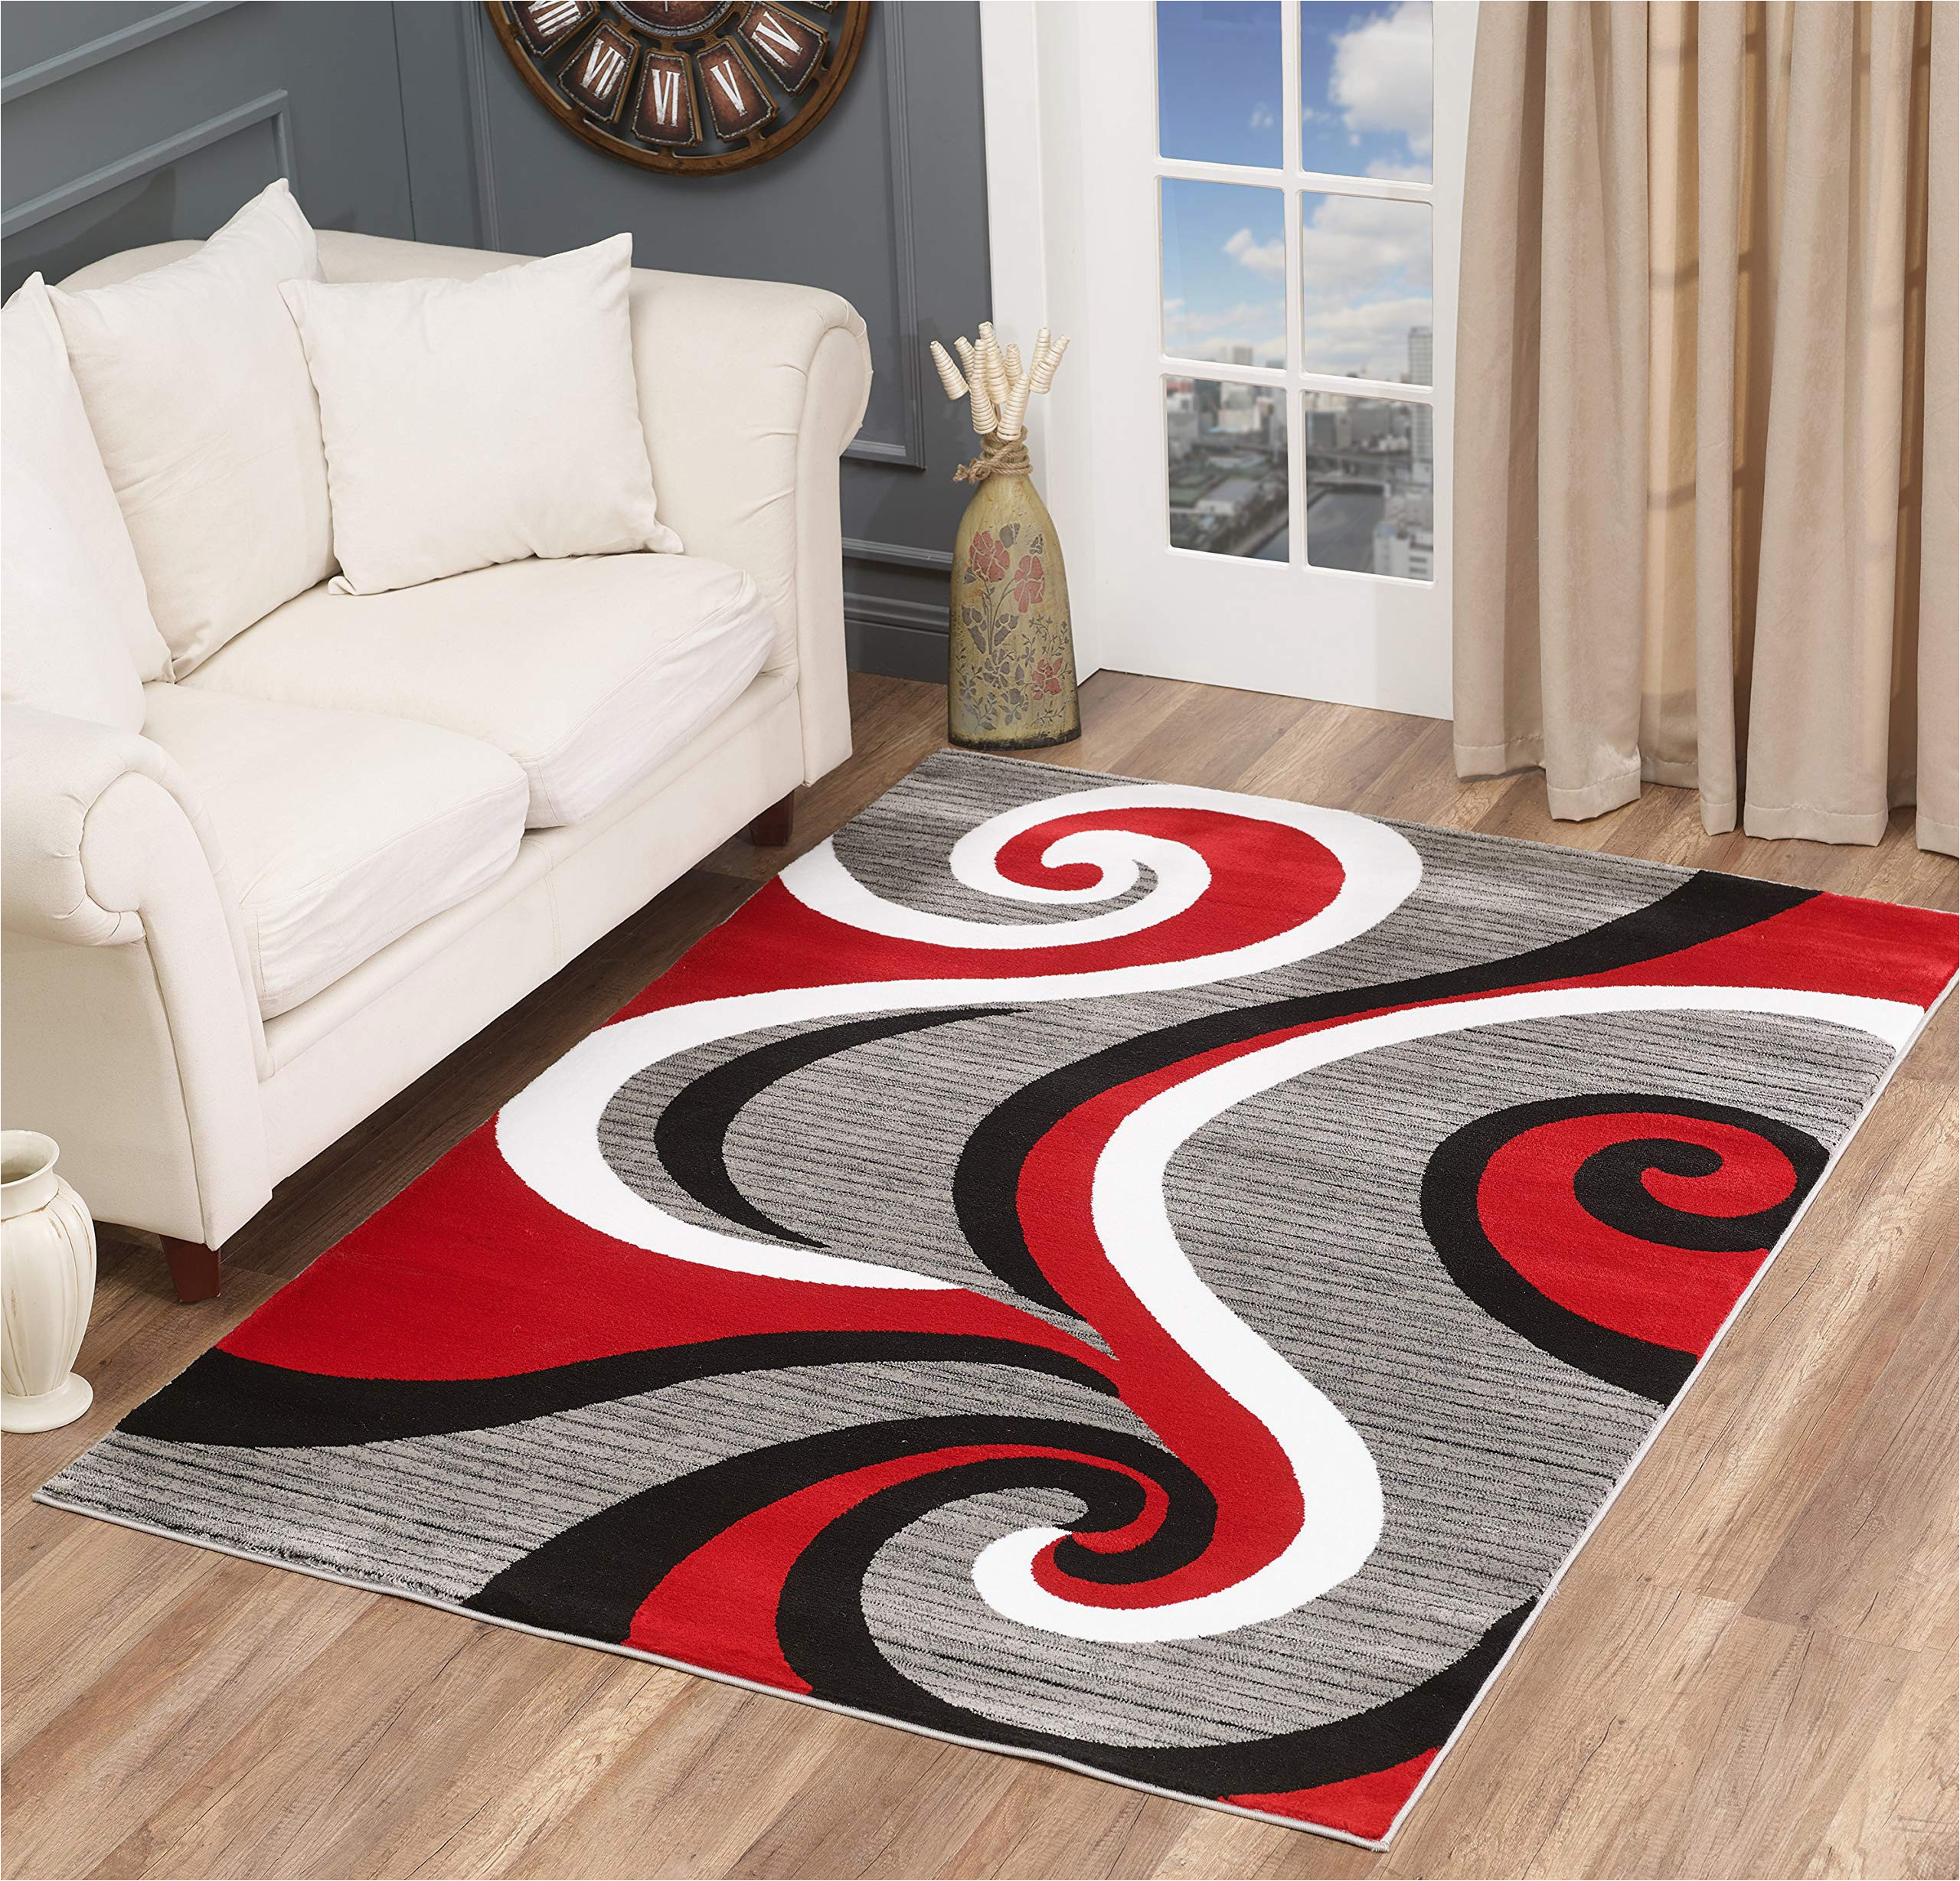 5 X 7 Red area Rug Glory Rugs Modern area Rug 5×7 Red Swirls Carpet Bedroom Living Room Contemporary Dining Accent Sevilla Collection 4817 (5×7, Red)